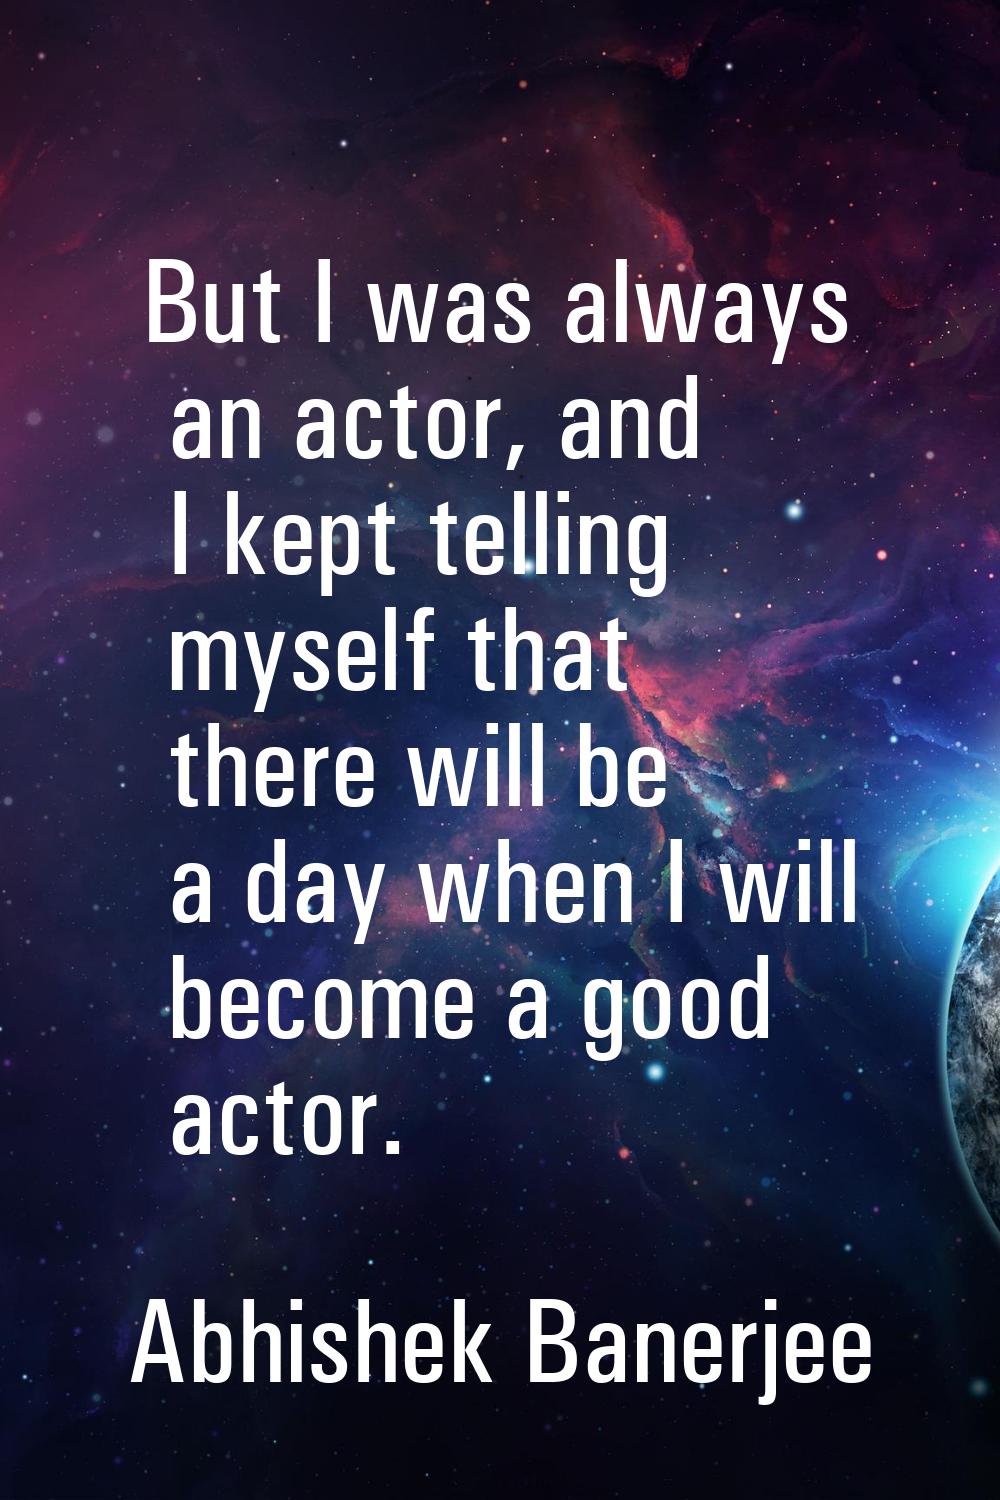 But I was always an actor, and I kept telling myself that there will be a day when I will become a 